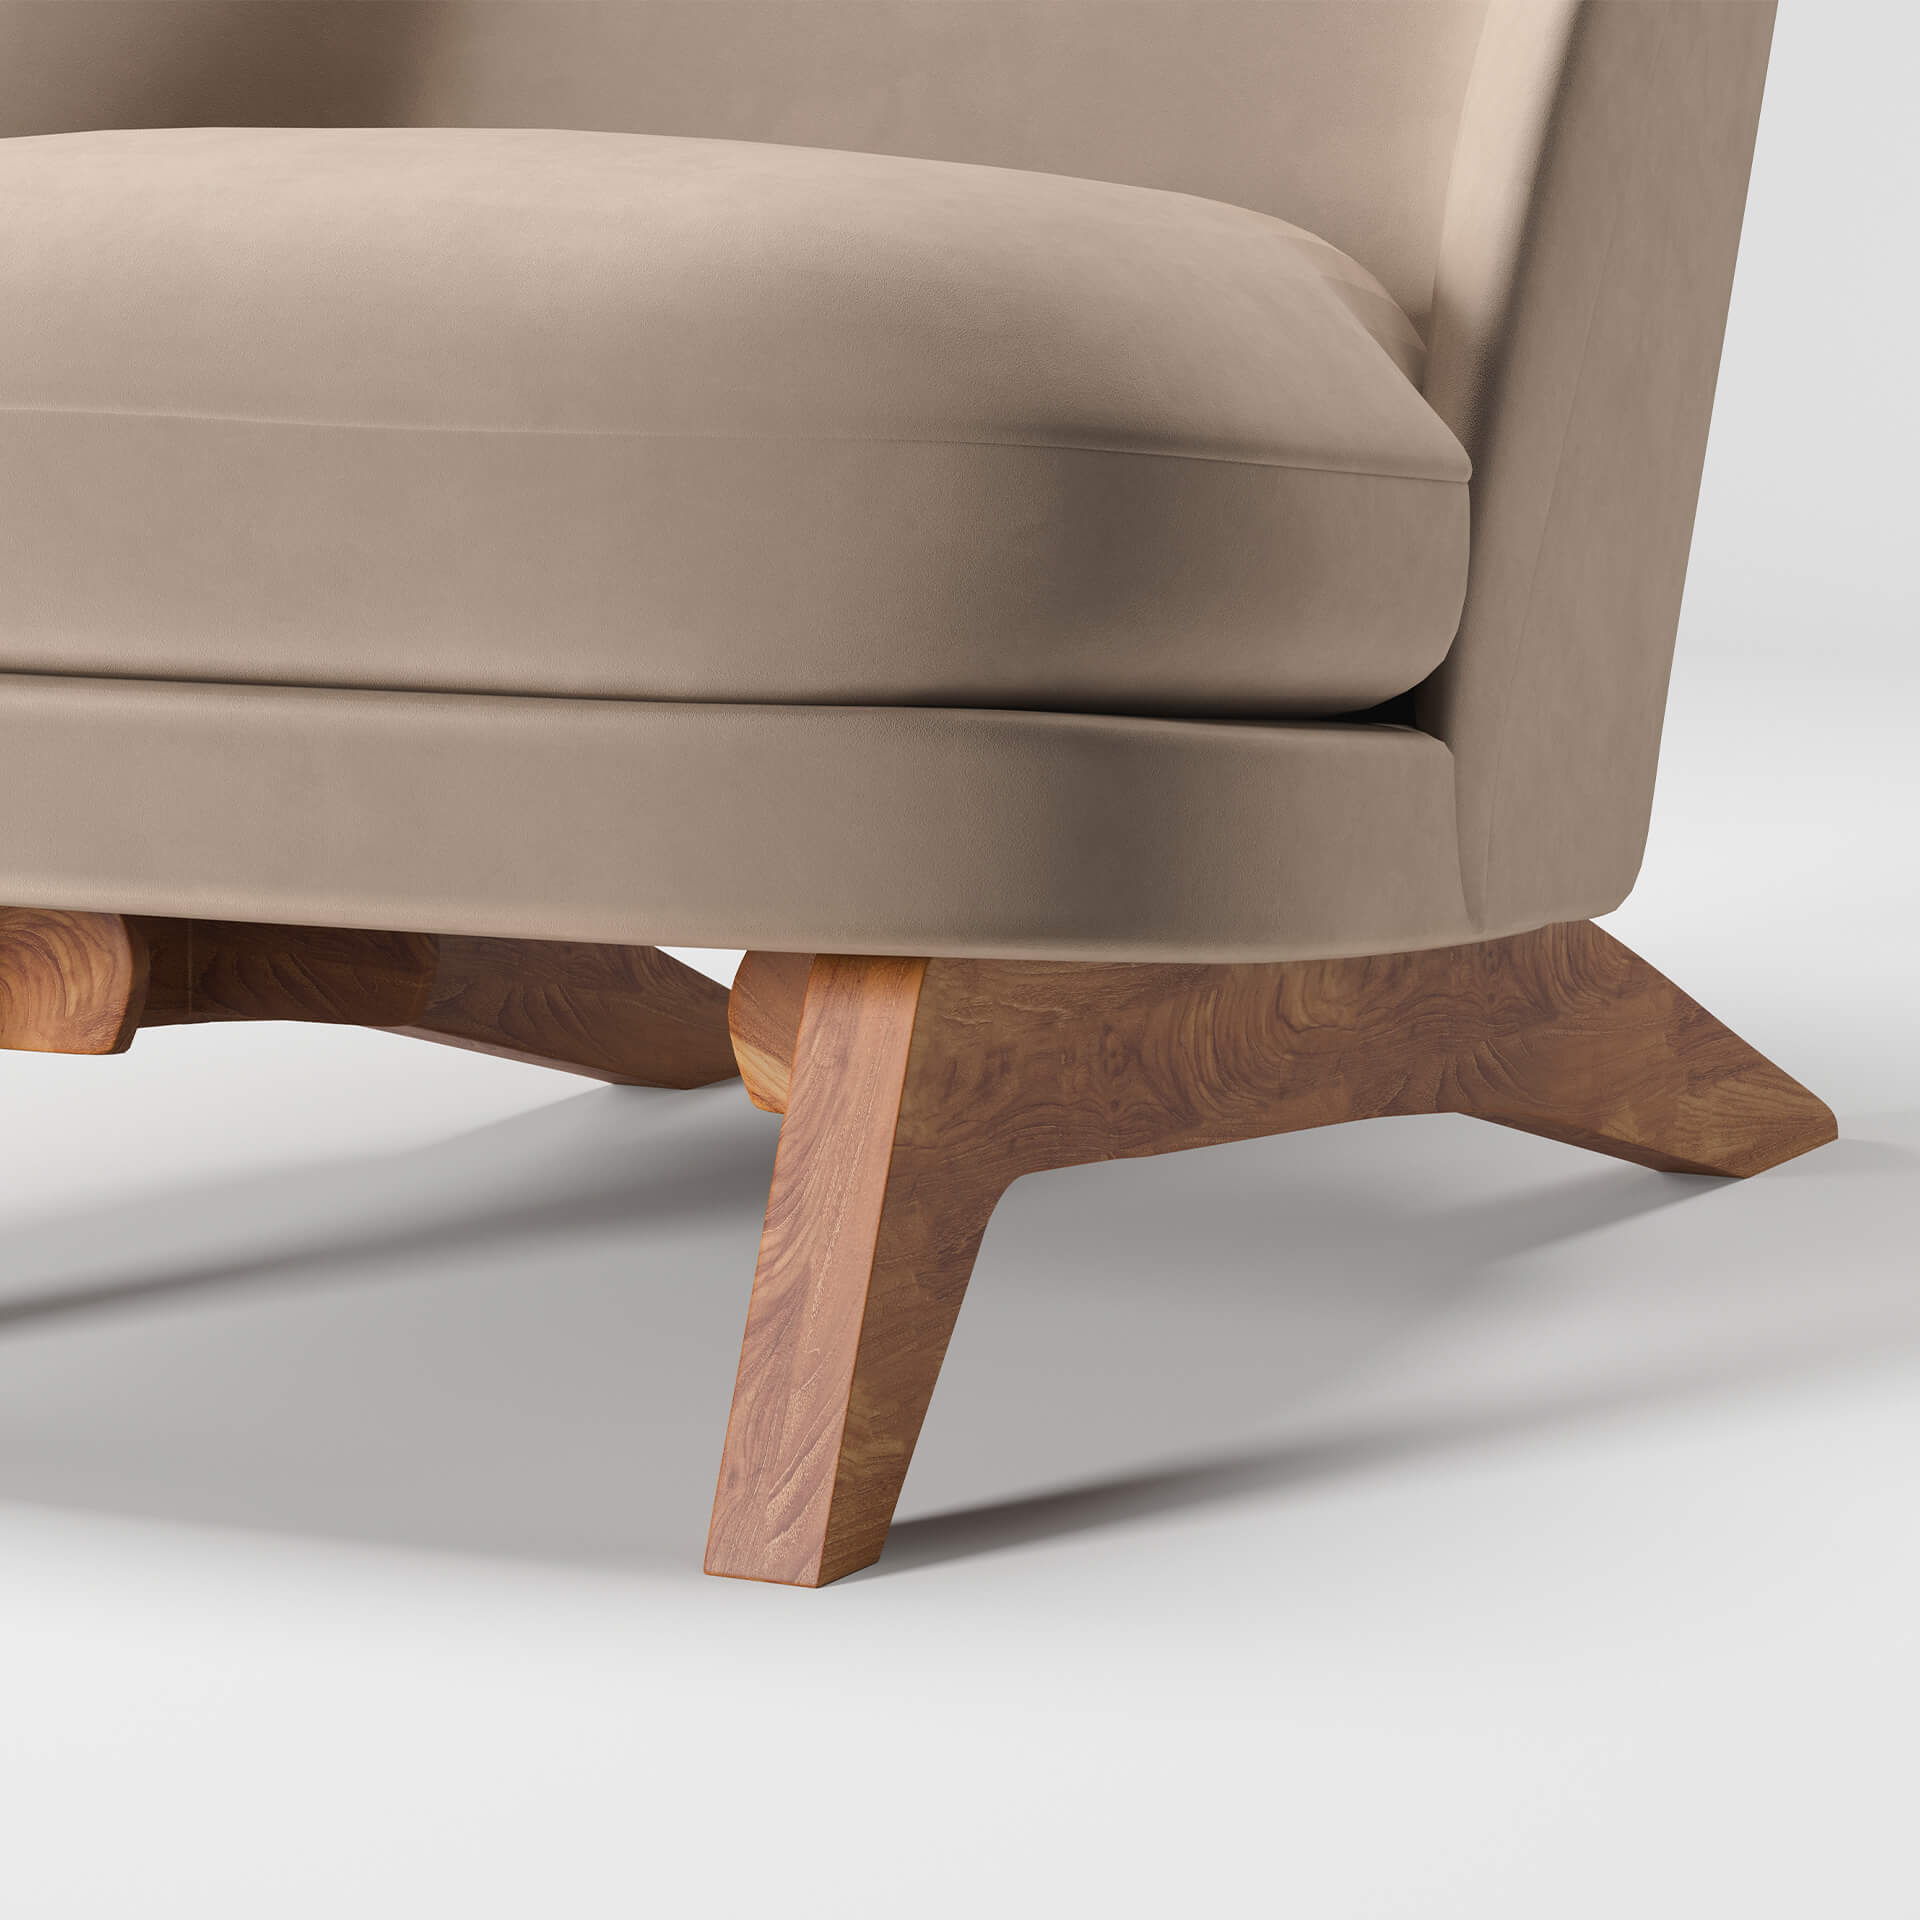 Close-Up 3D Render of Beige Upholstered Chair